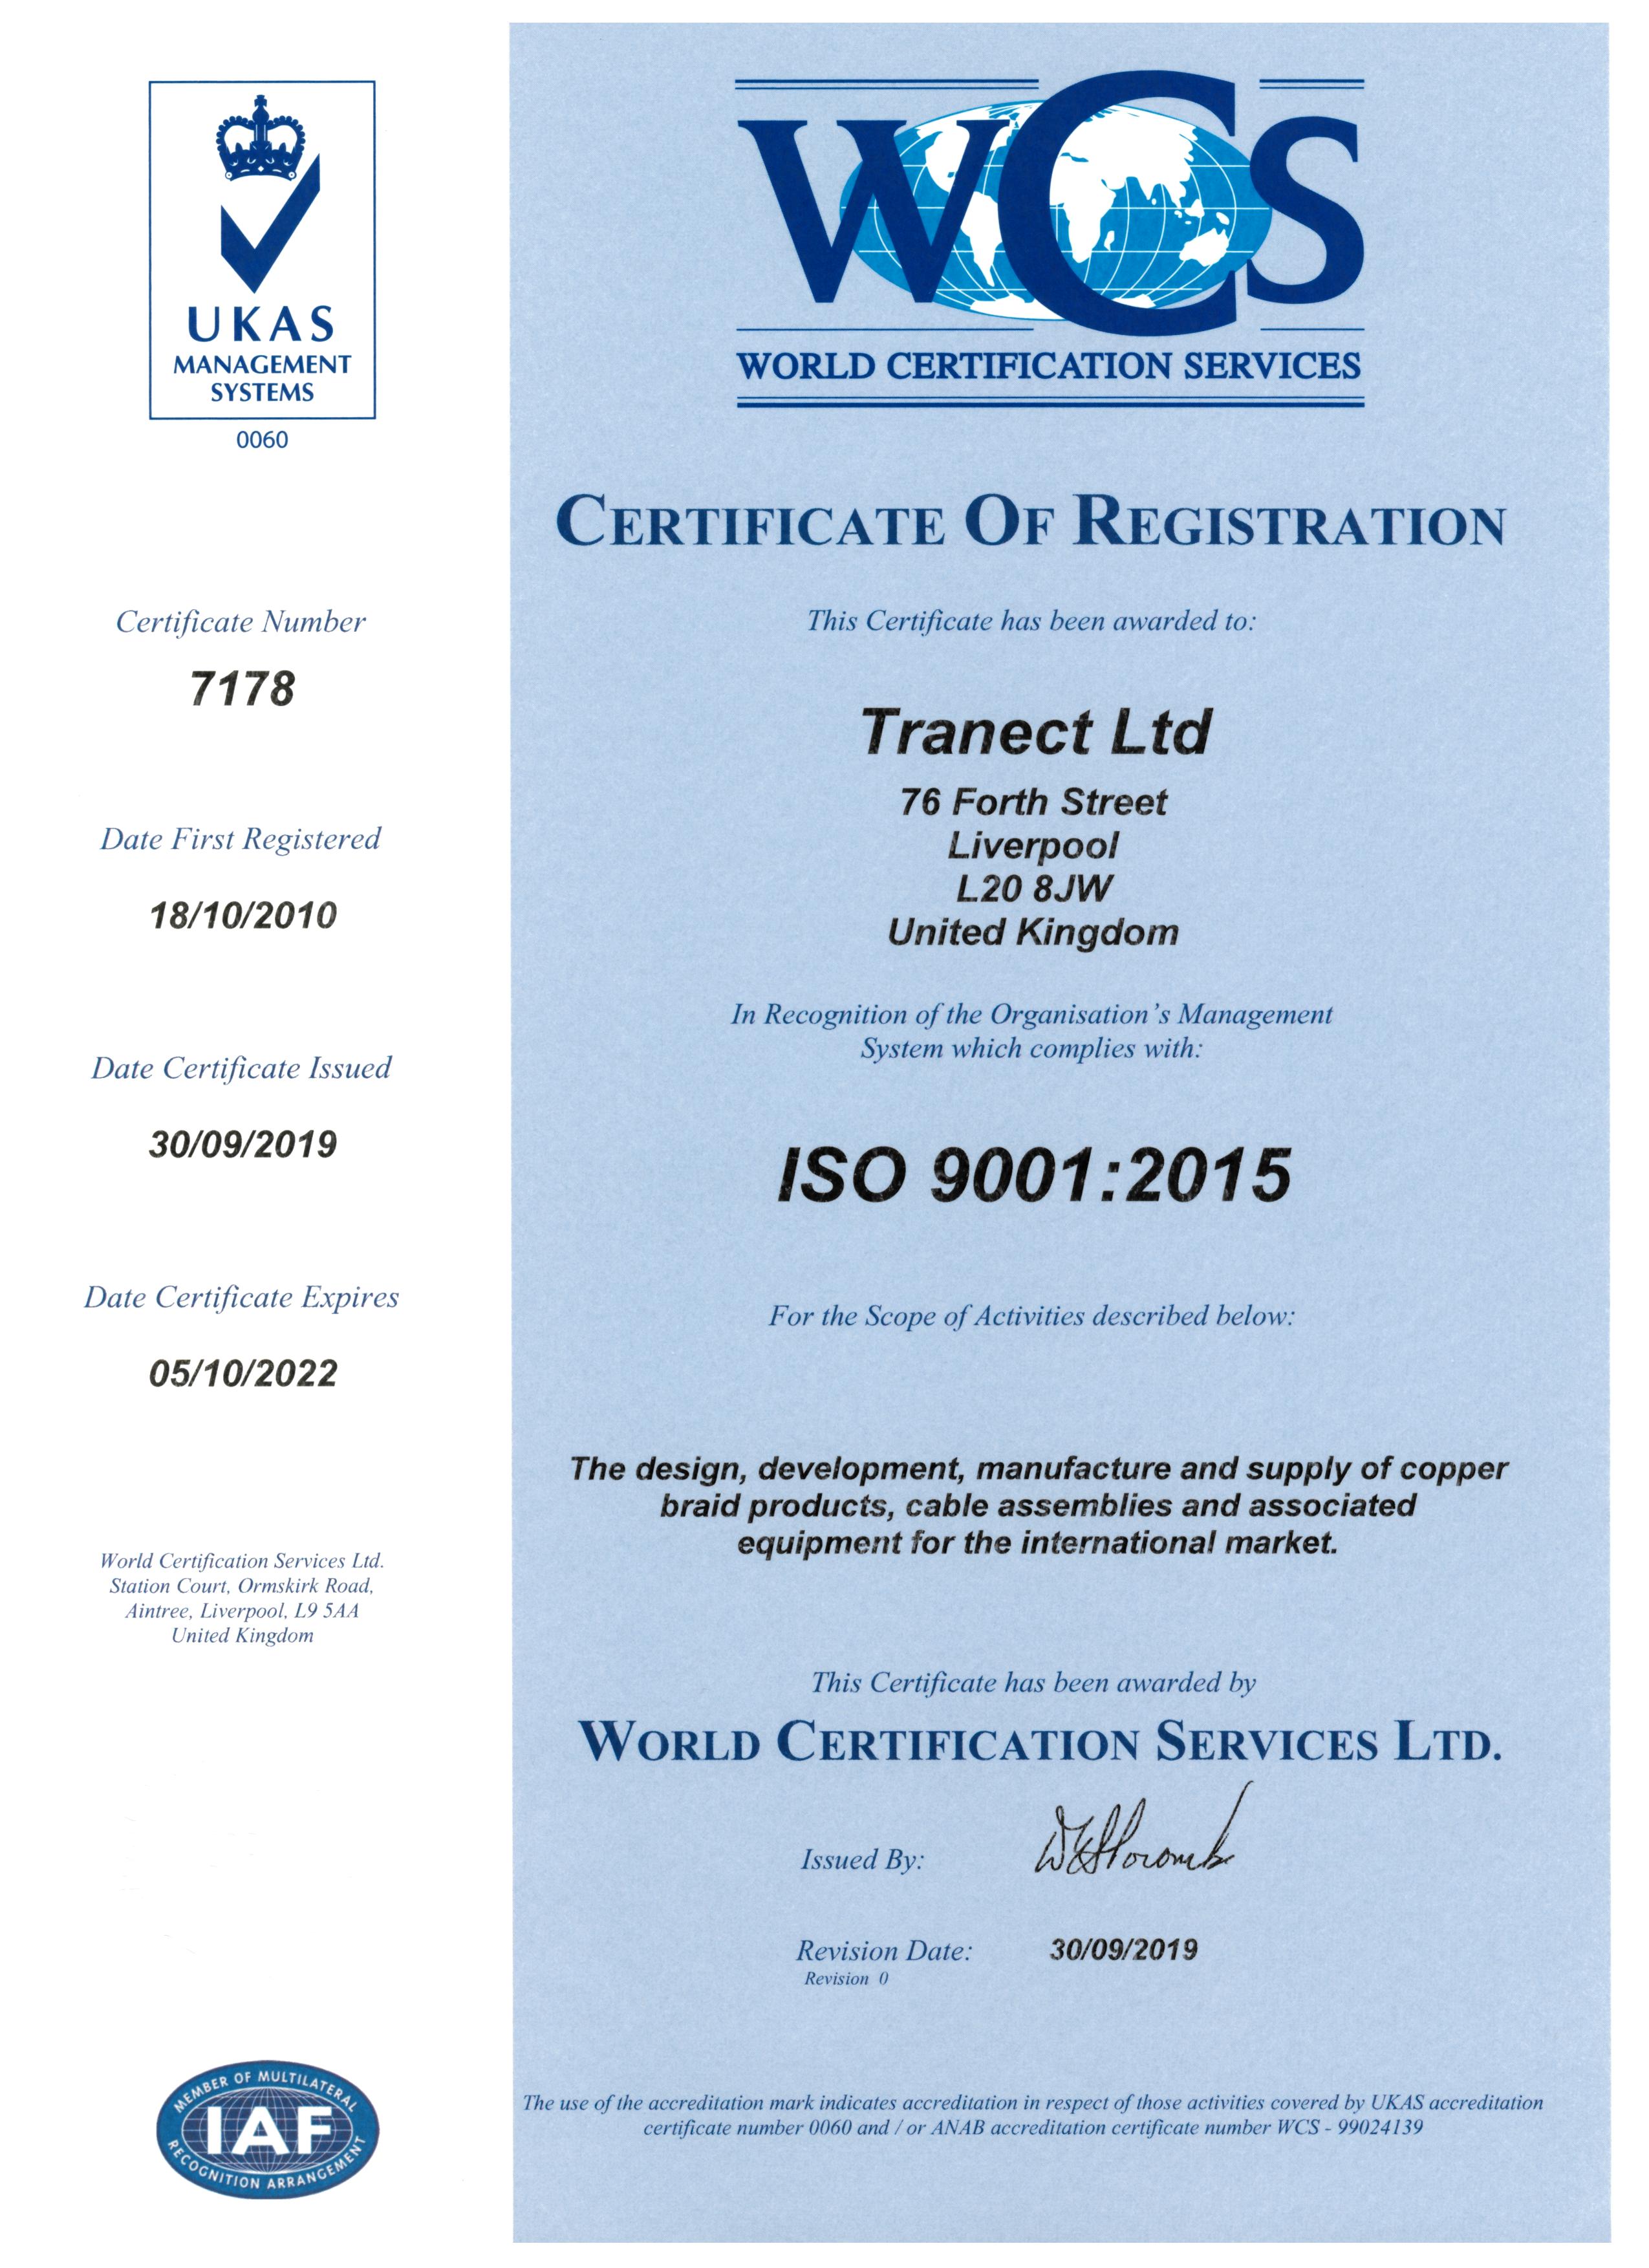 ISO 9001:2015 Quality Certificate